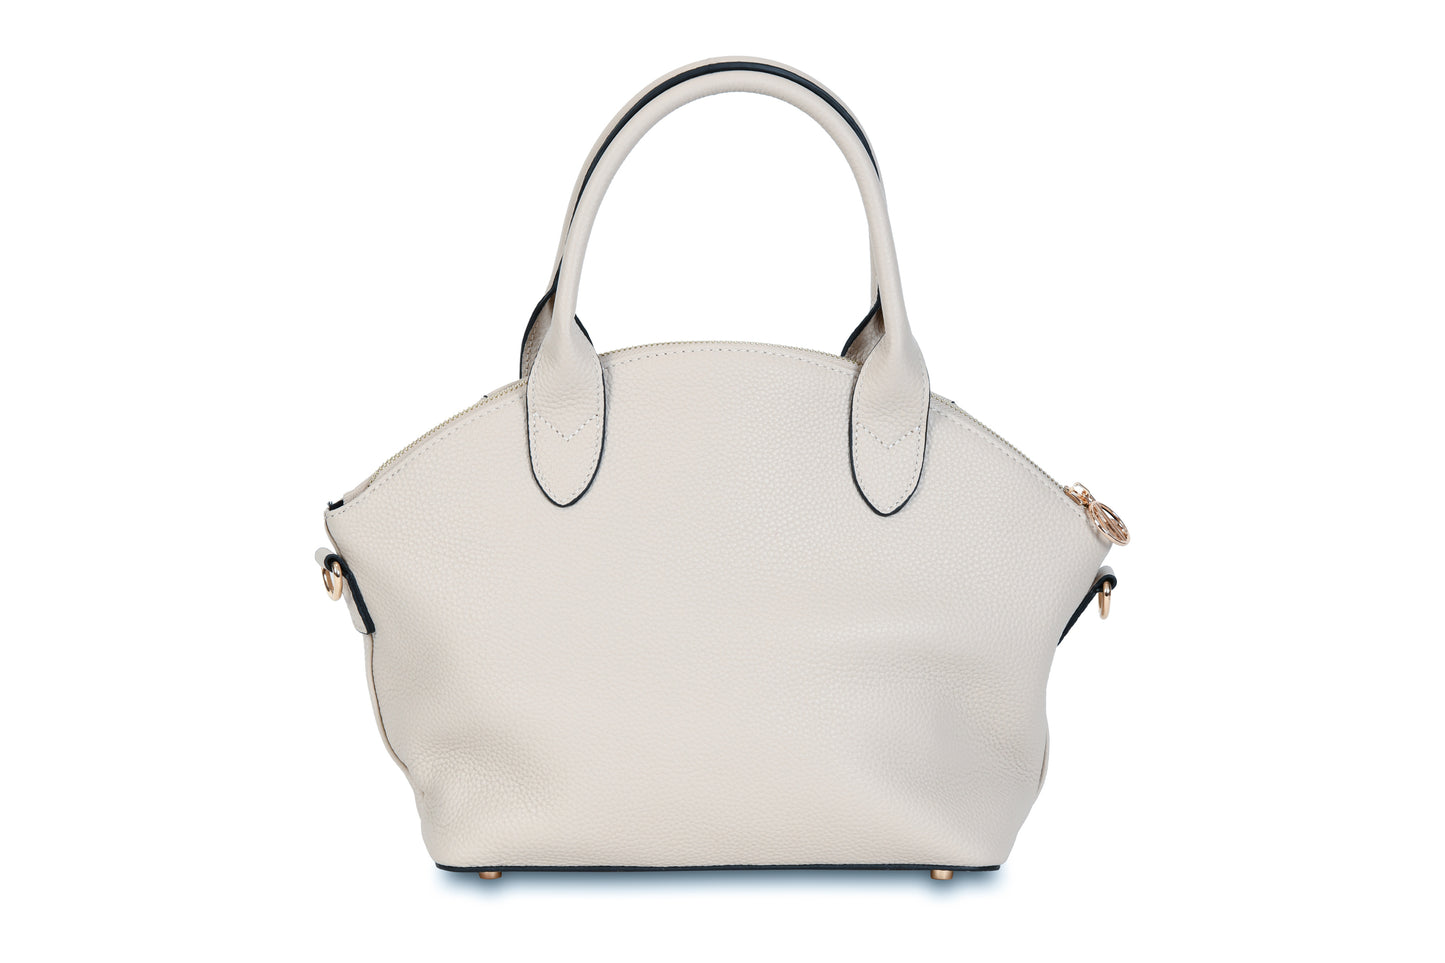 Bali Pebble Grain Leather Cream White Handbag made by Dewi Maya back view available at the best boutique in Upstate South Carolina Spartanburg Greenville Dewi Maya Boutique